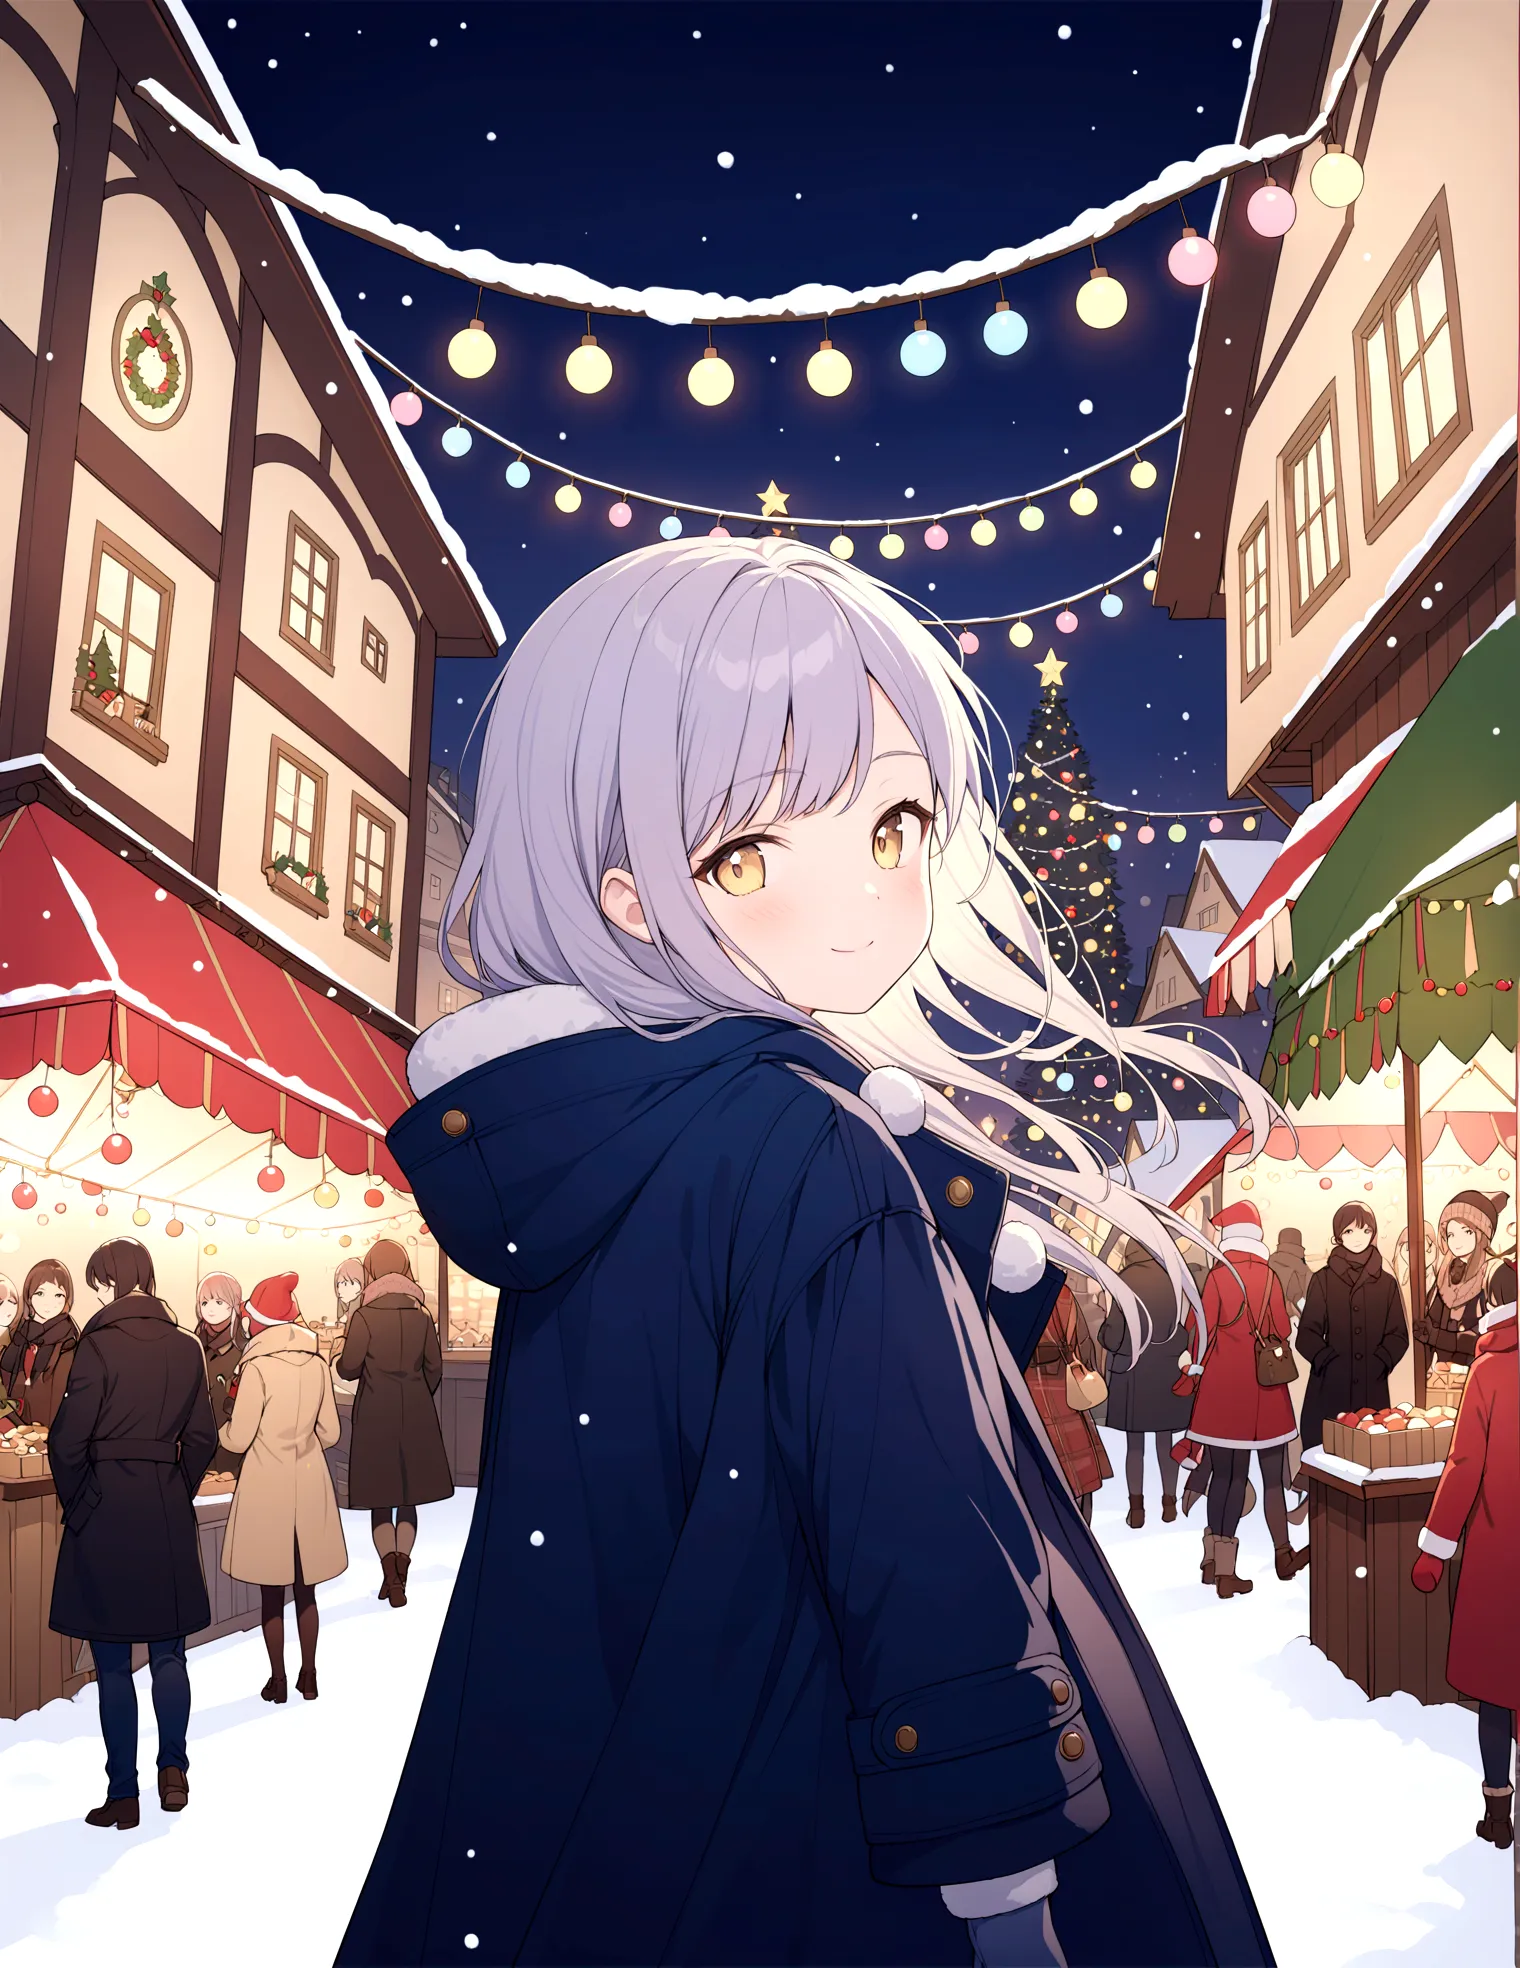 European style town, winter night, Christmas market, warm light, girl in coat, soft smile, upturned cheeks, soft moving hair, lo...